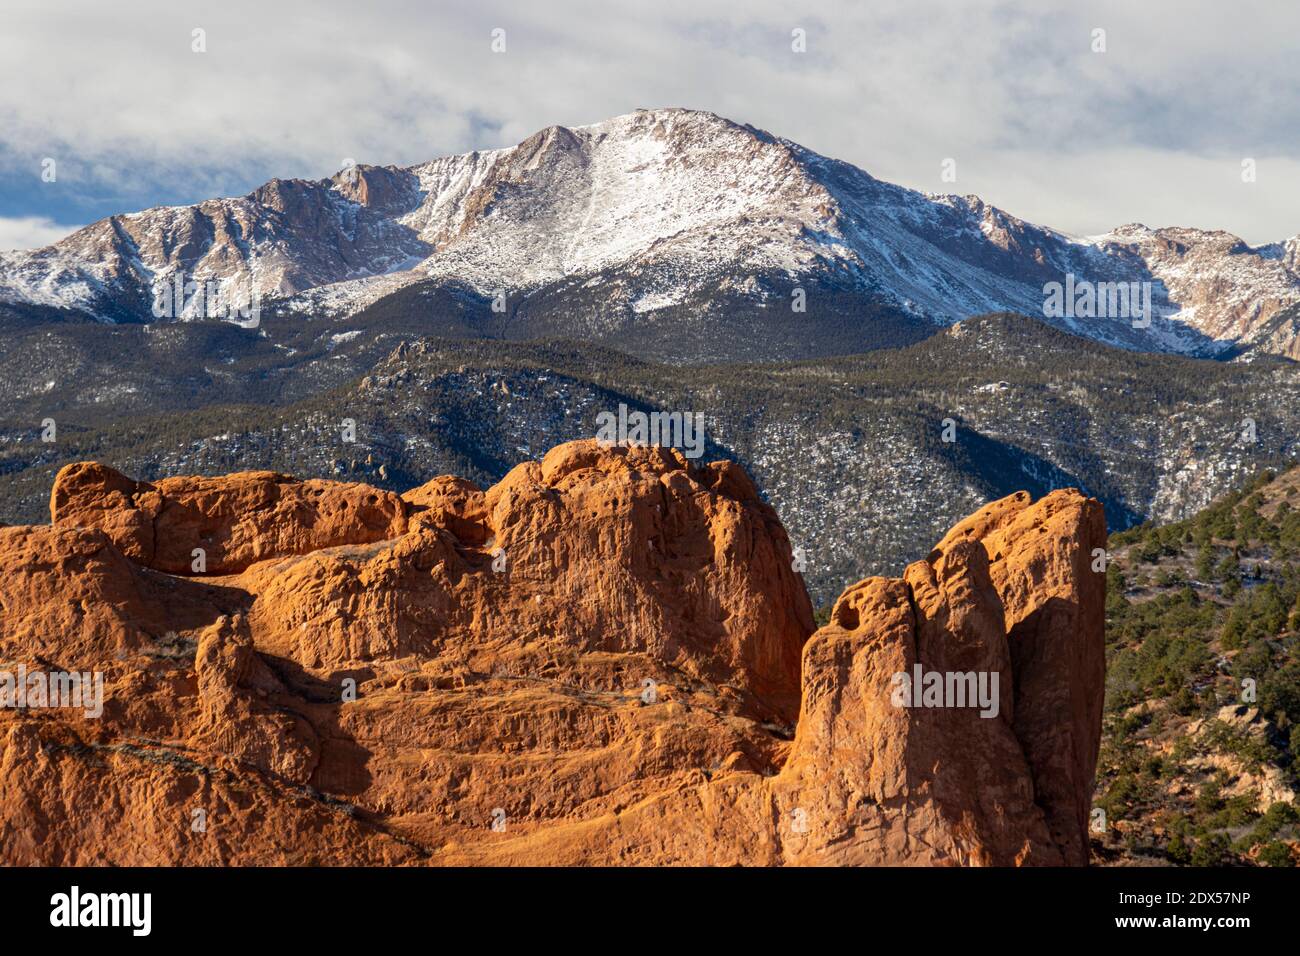 Beautiful view of garden of the gods and pikes peak colorado stock photo